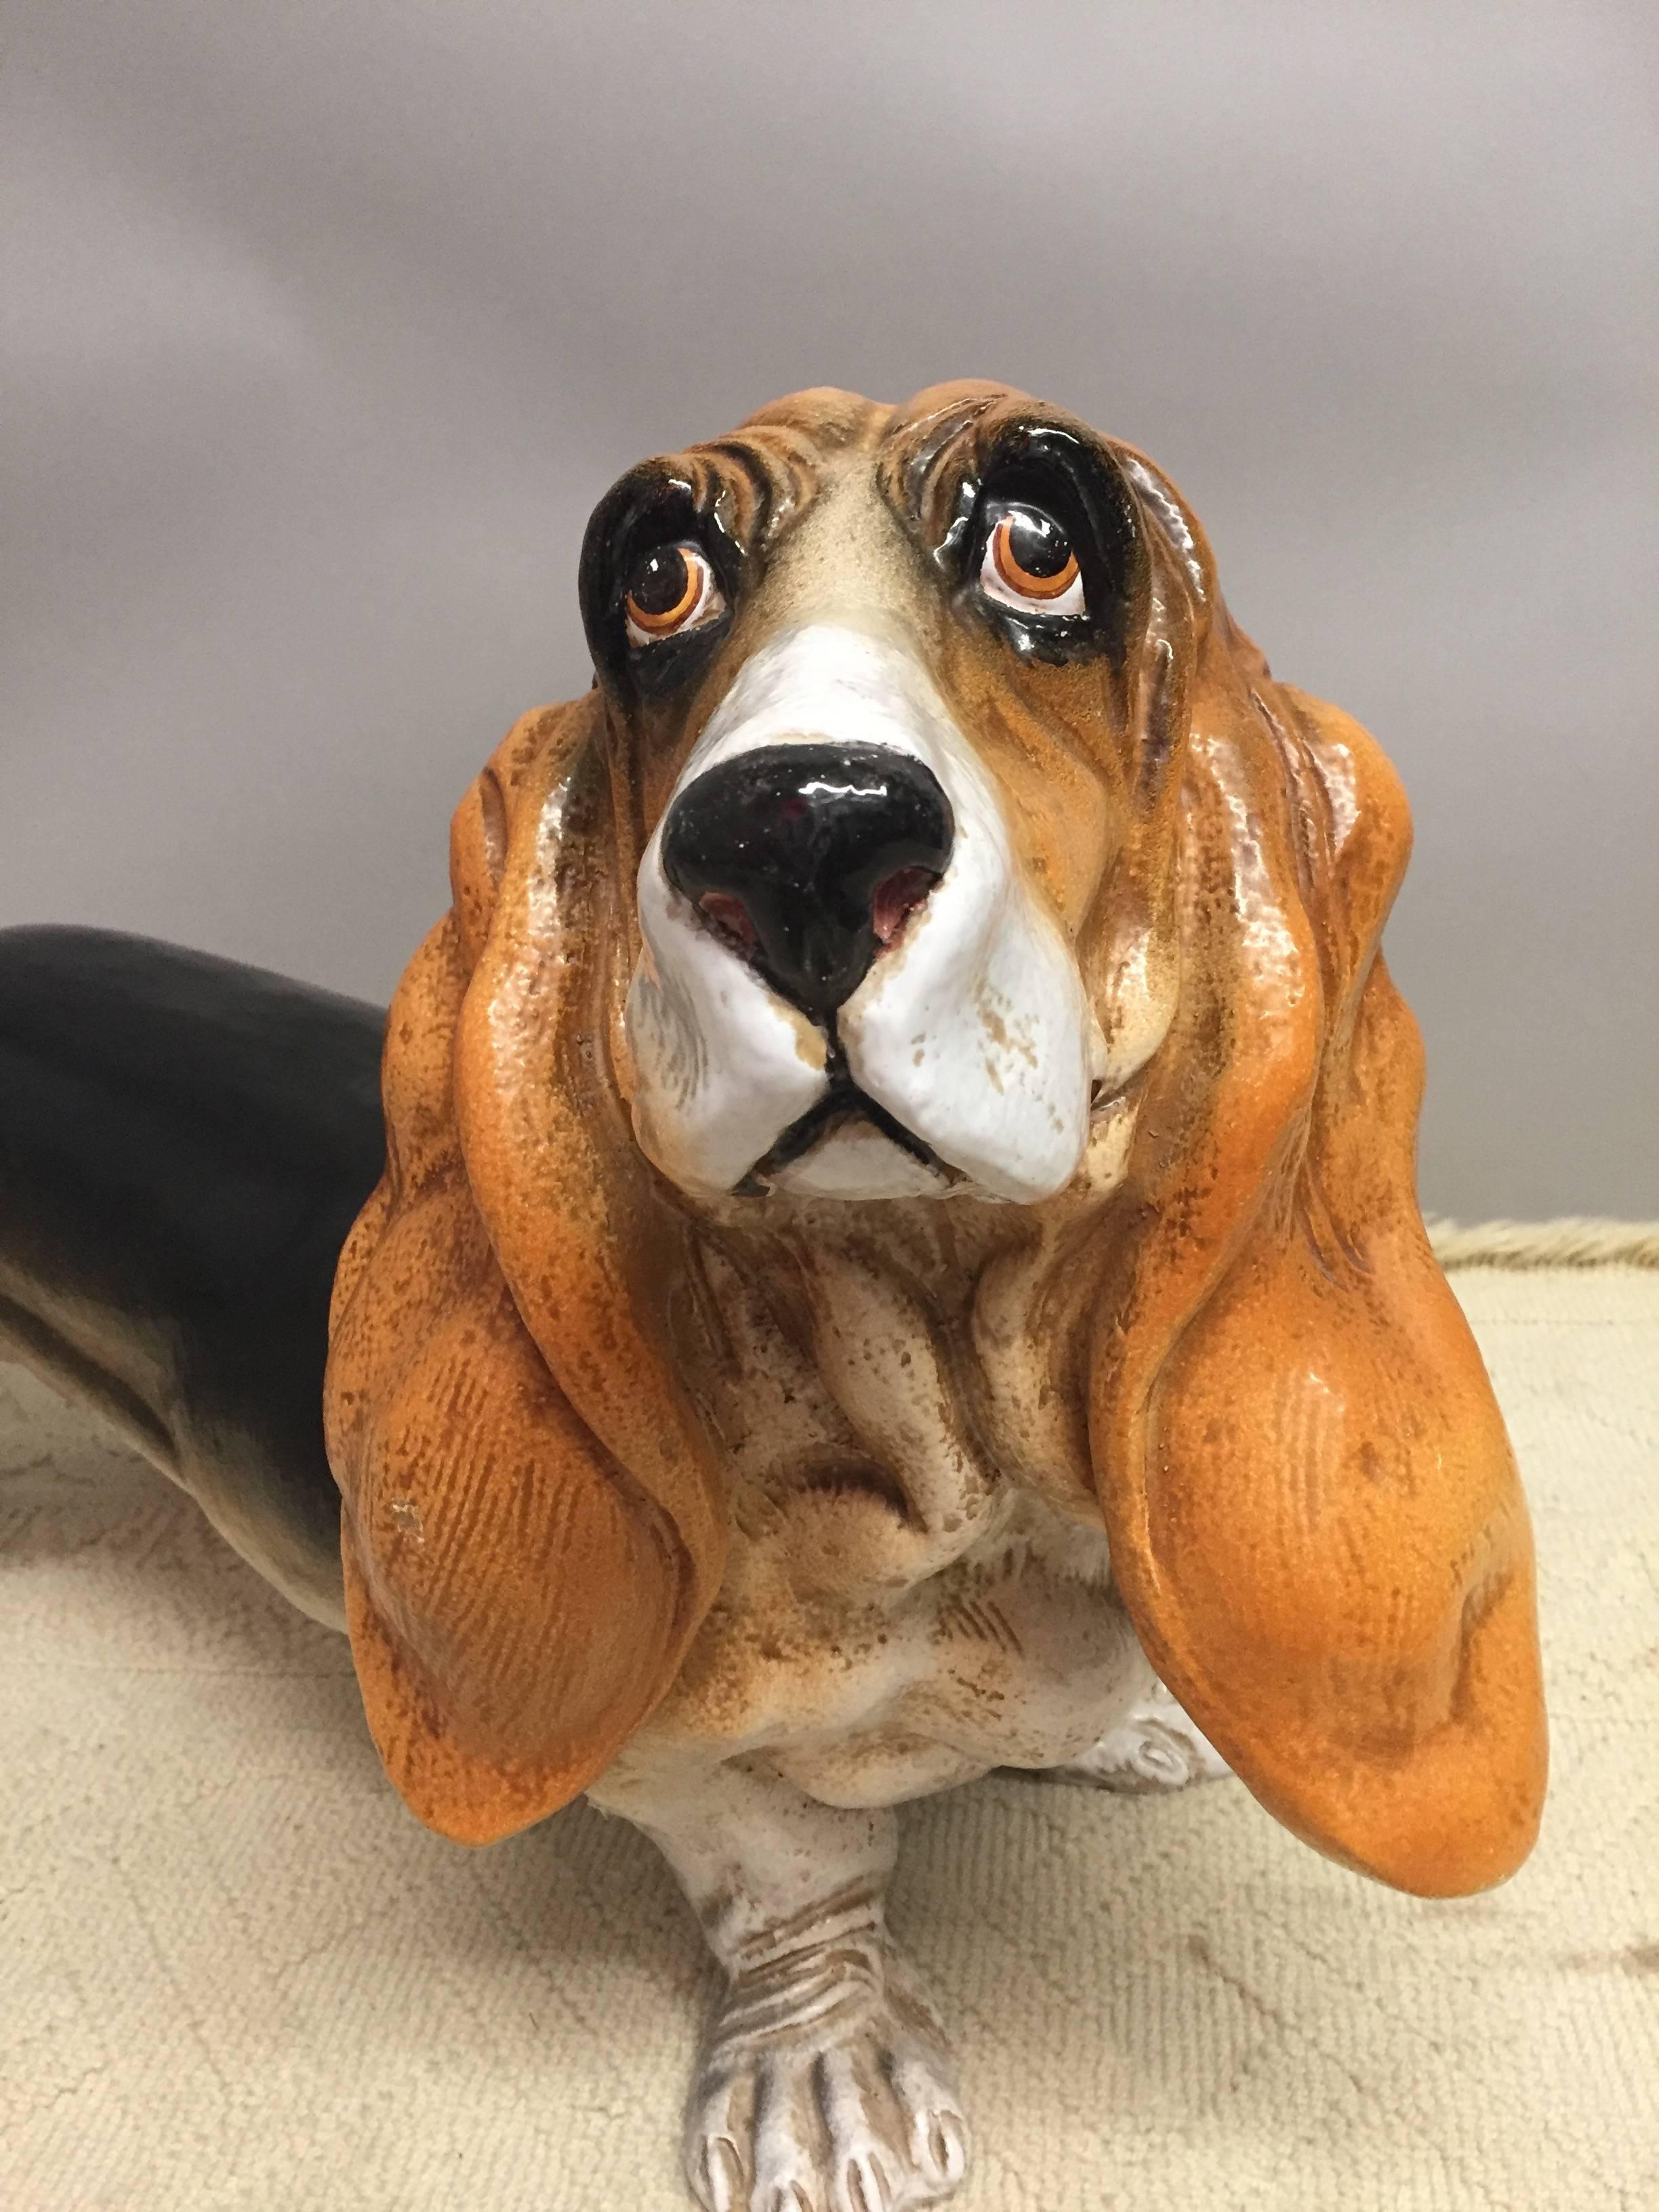 Large and adorable glazed terra cotta sculpture of a life like basset hound.